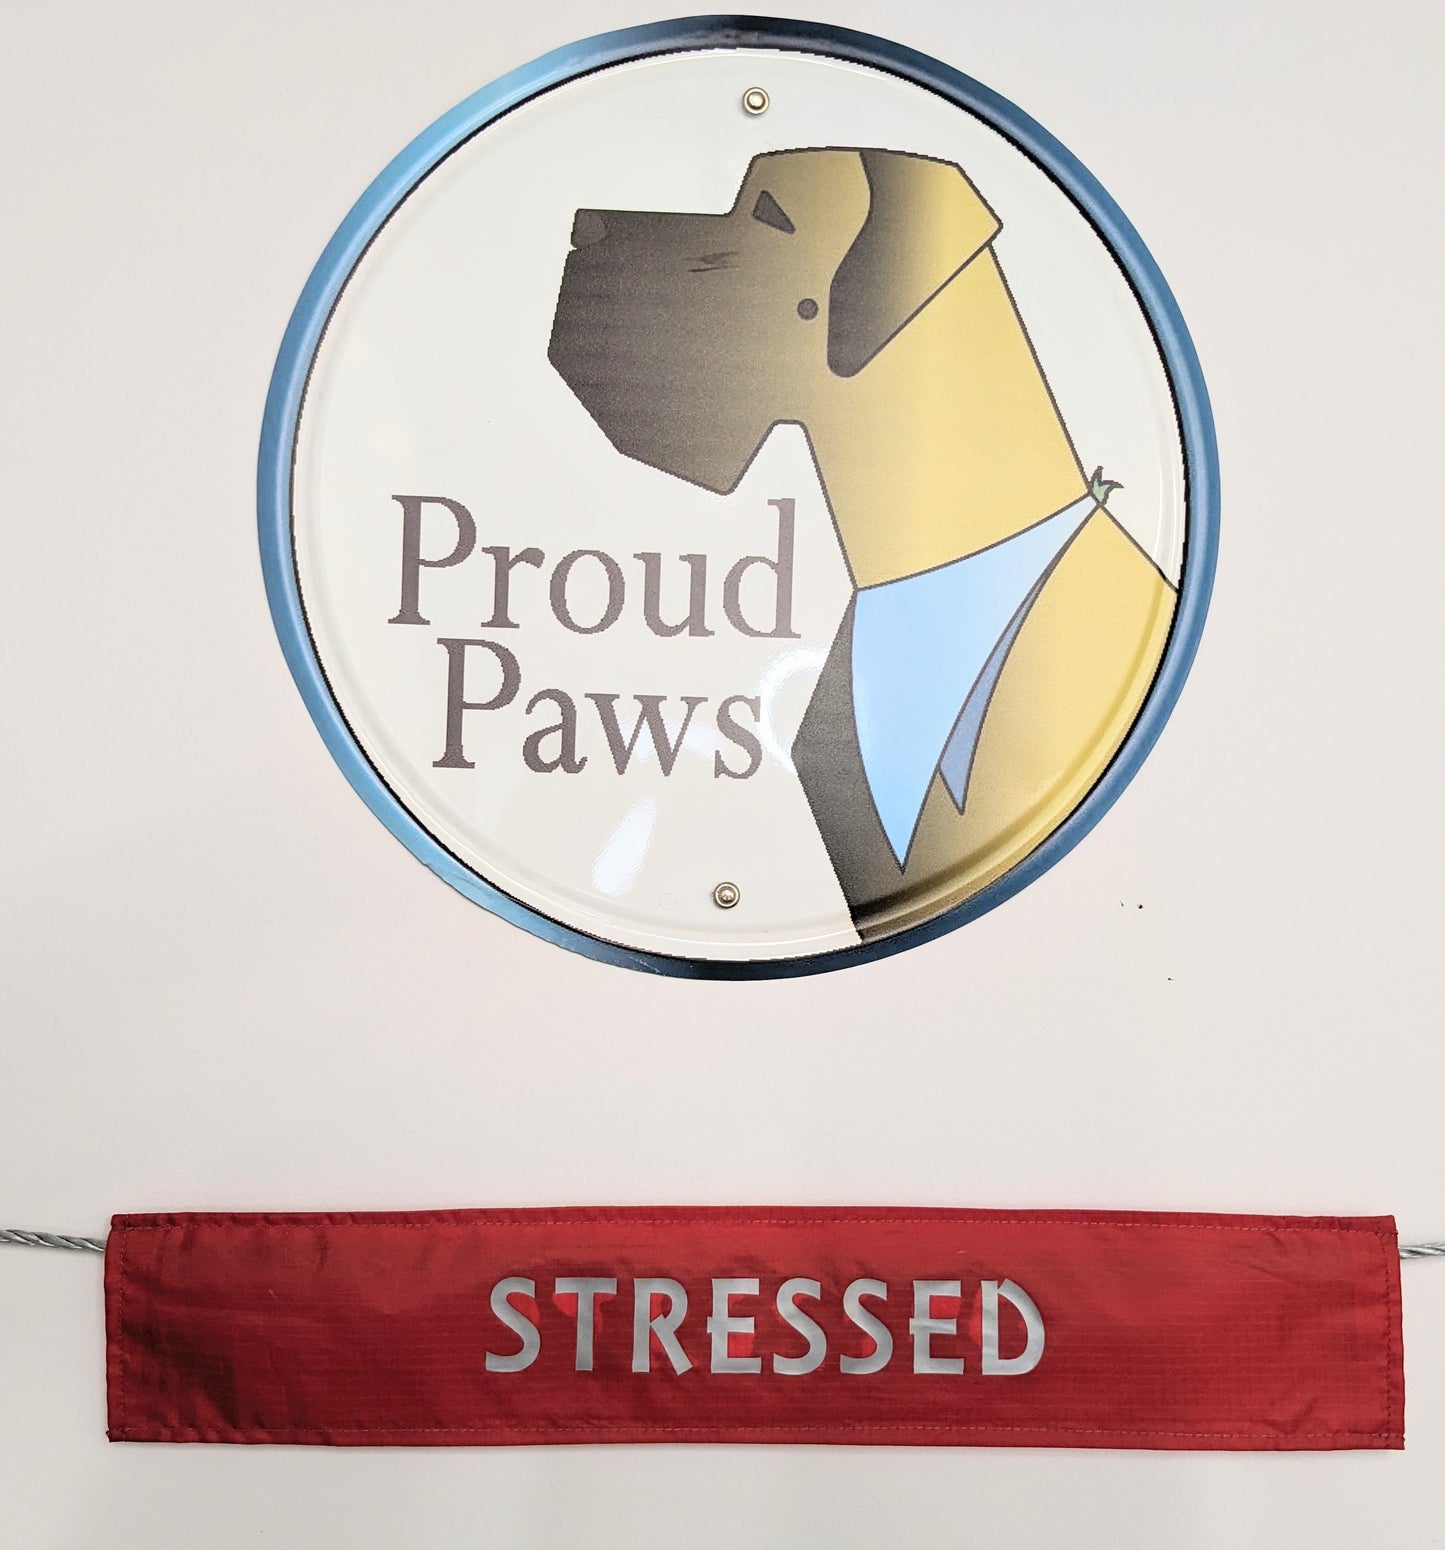 "STRESSED" Bright Red Dog lead sleeve / cover for dog leash - canine training - puppy socialising - stressed stressing stressy dog